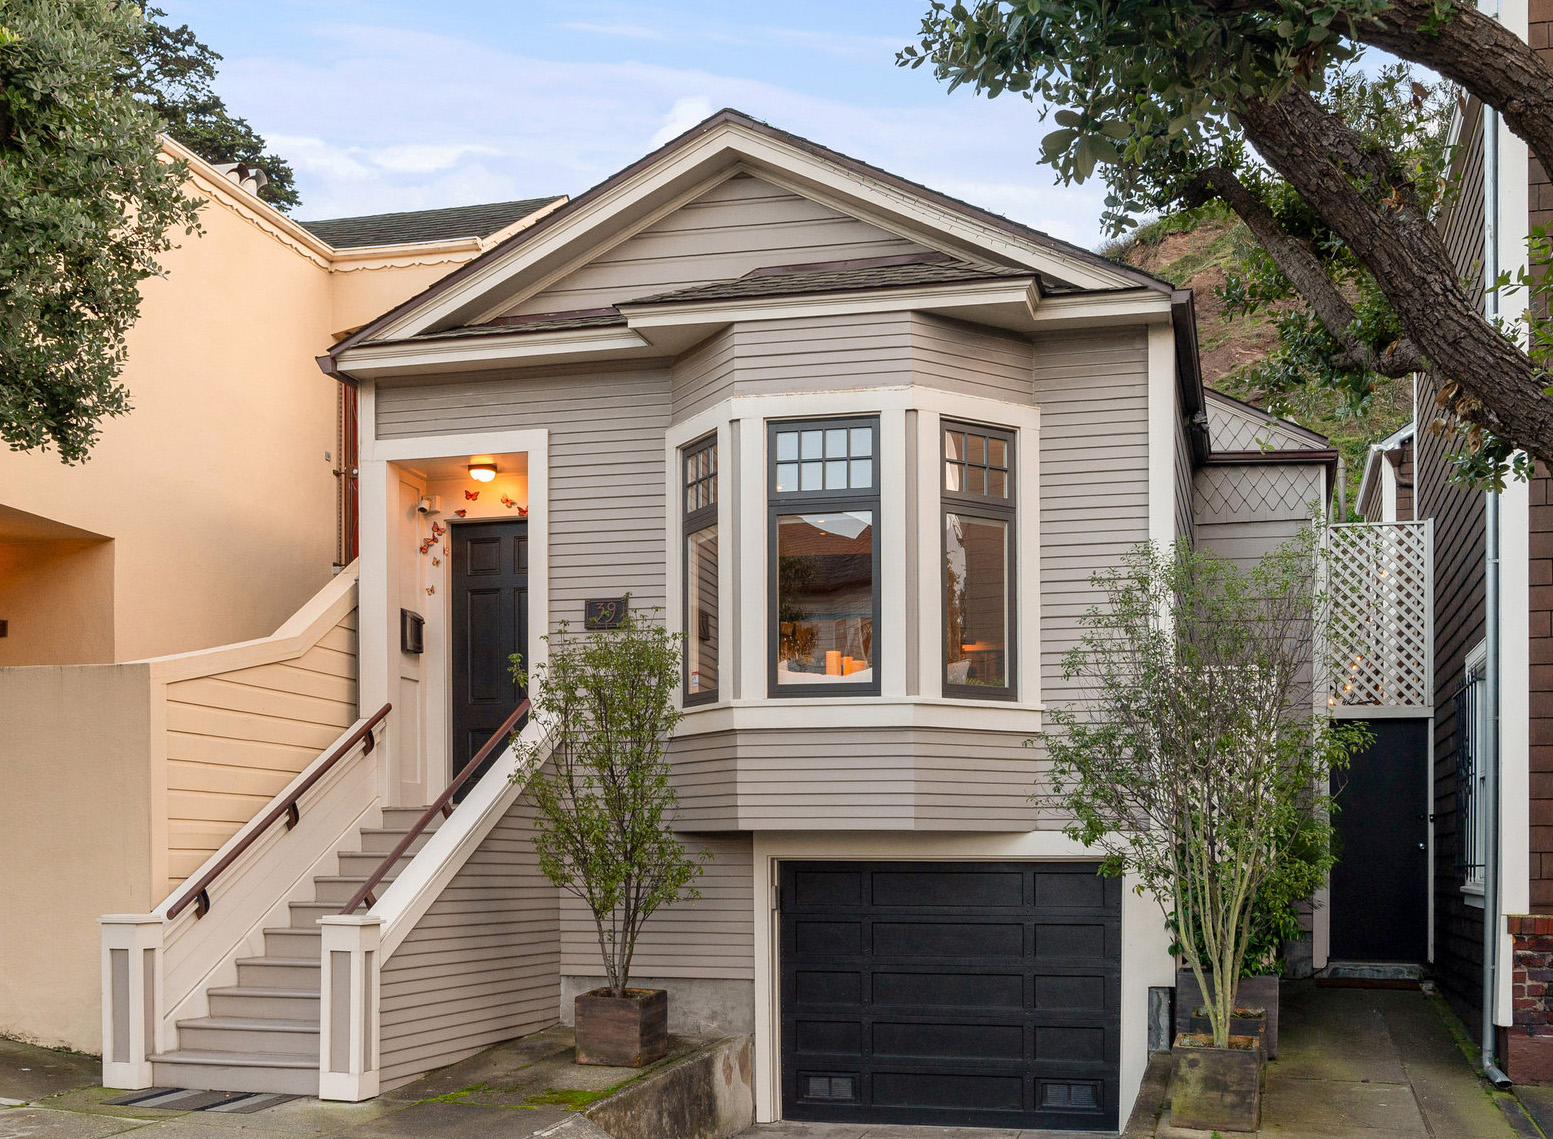 Front exterior view of 39 Carmel, a private sale in Cole Valley, showing a one story home